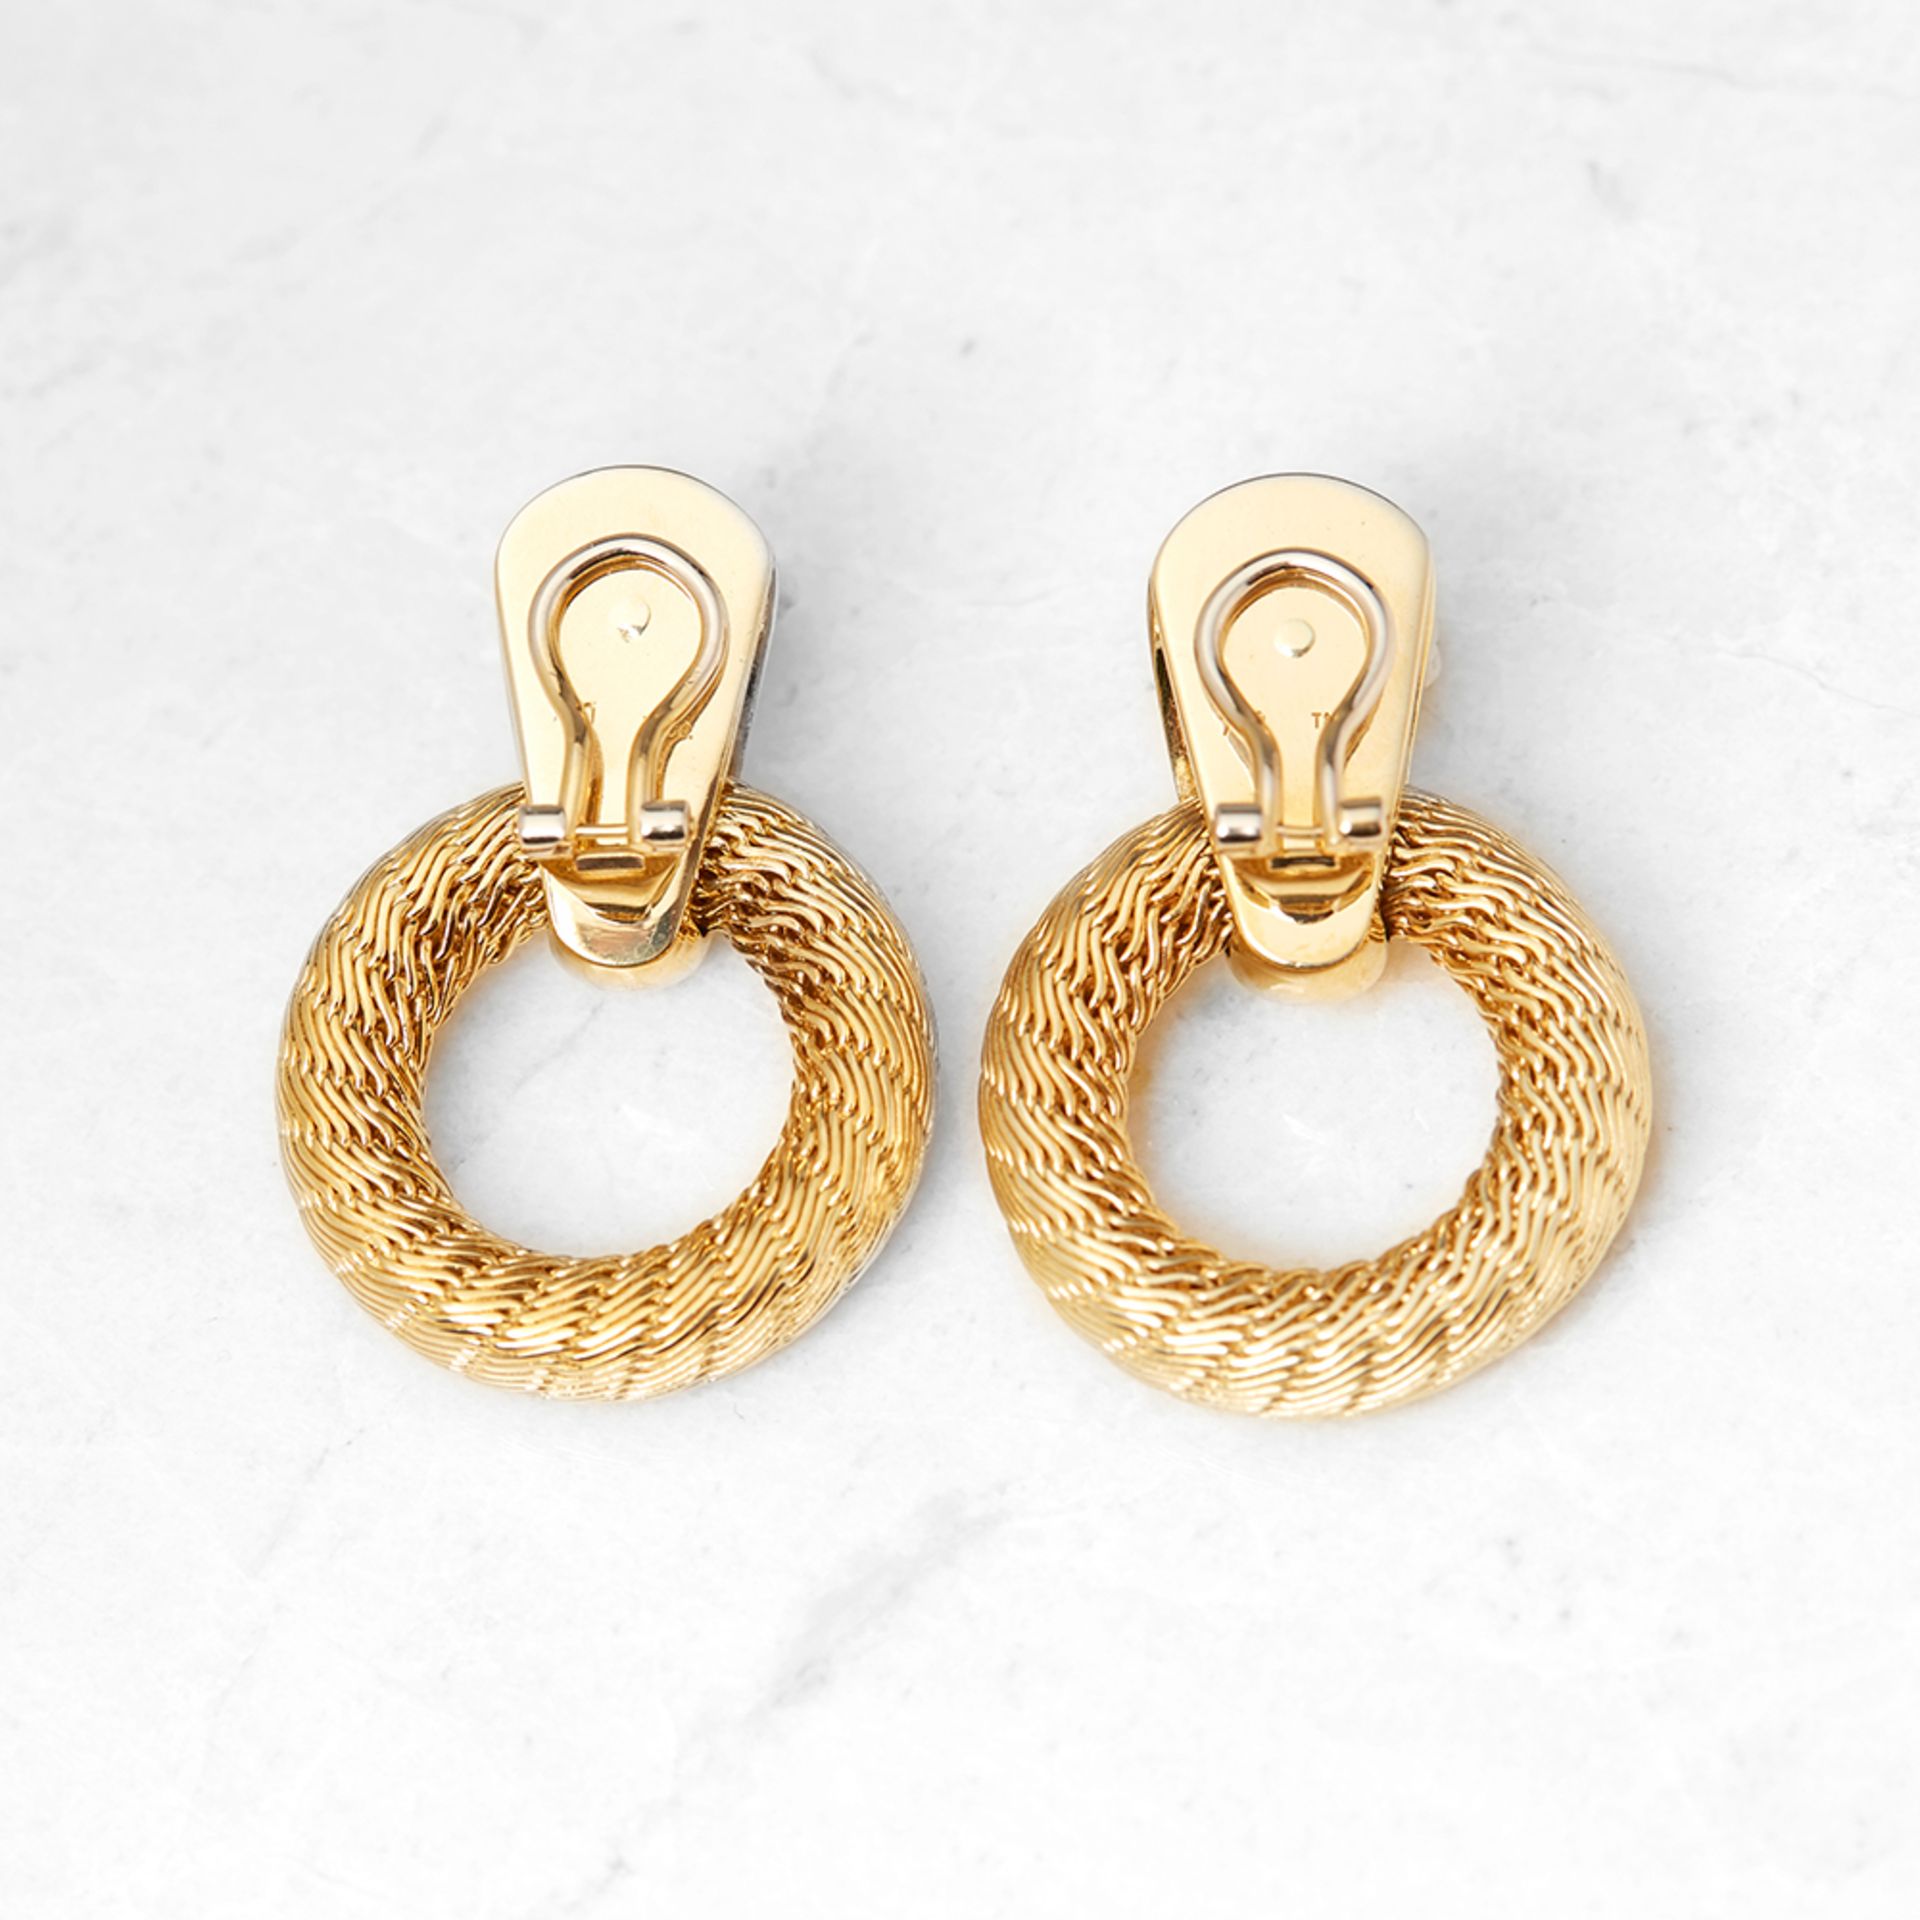 Tiffany & Co. 18k Yellow Gold Woven Hoop Ear Clips - Image 2 of 5